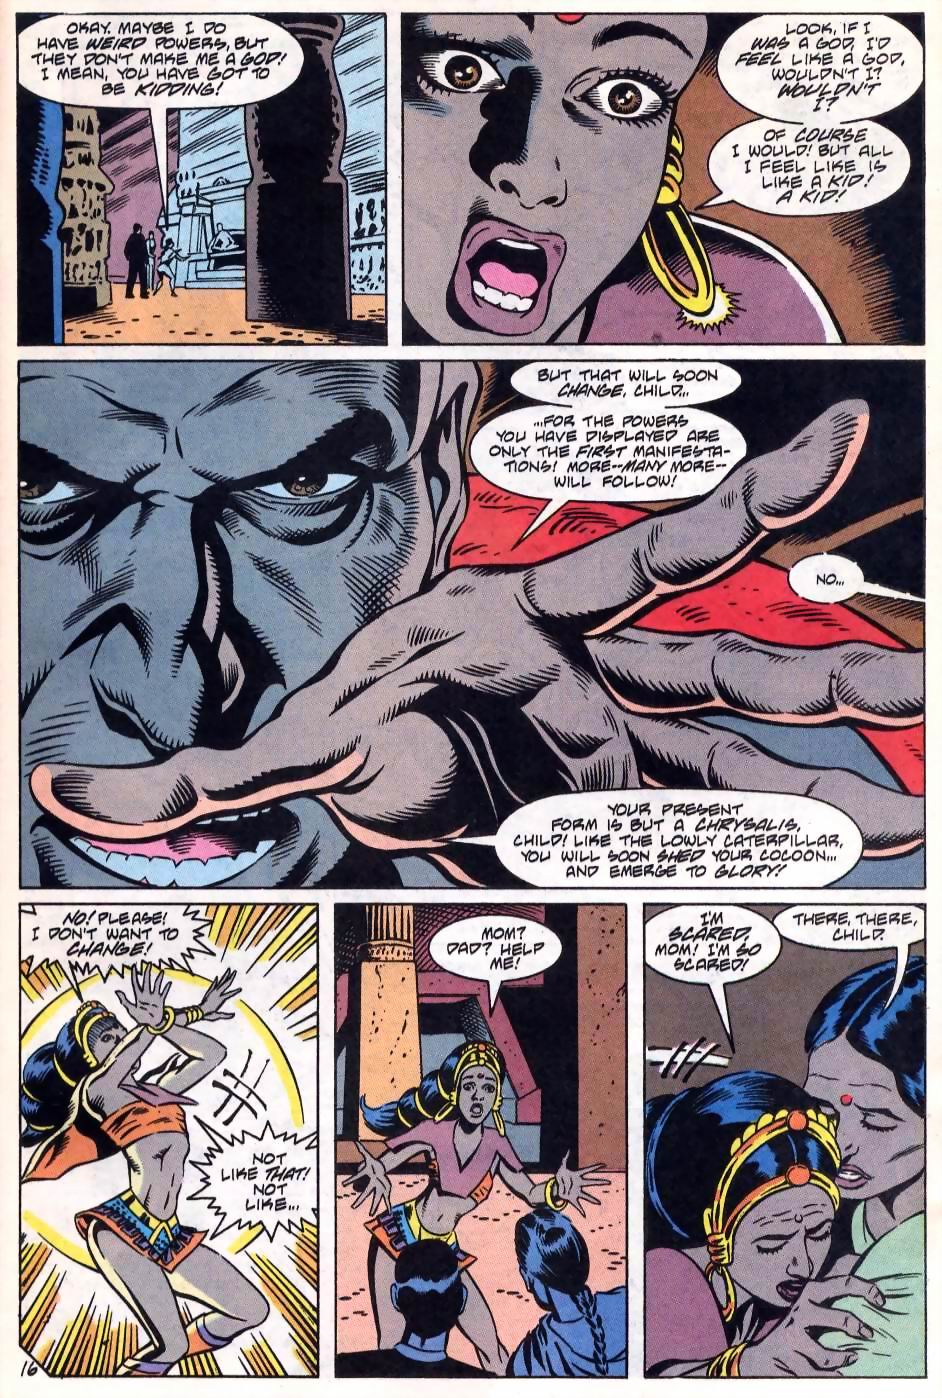 Justice League International (1993) 52 Page 16